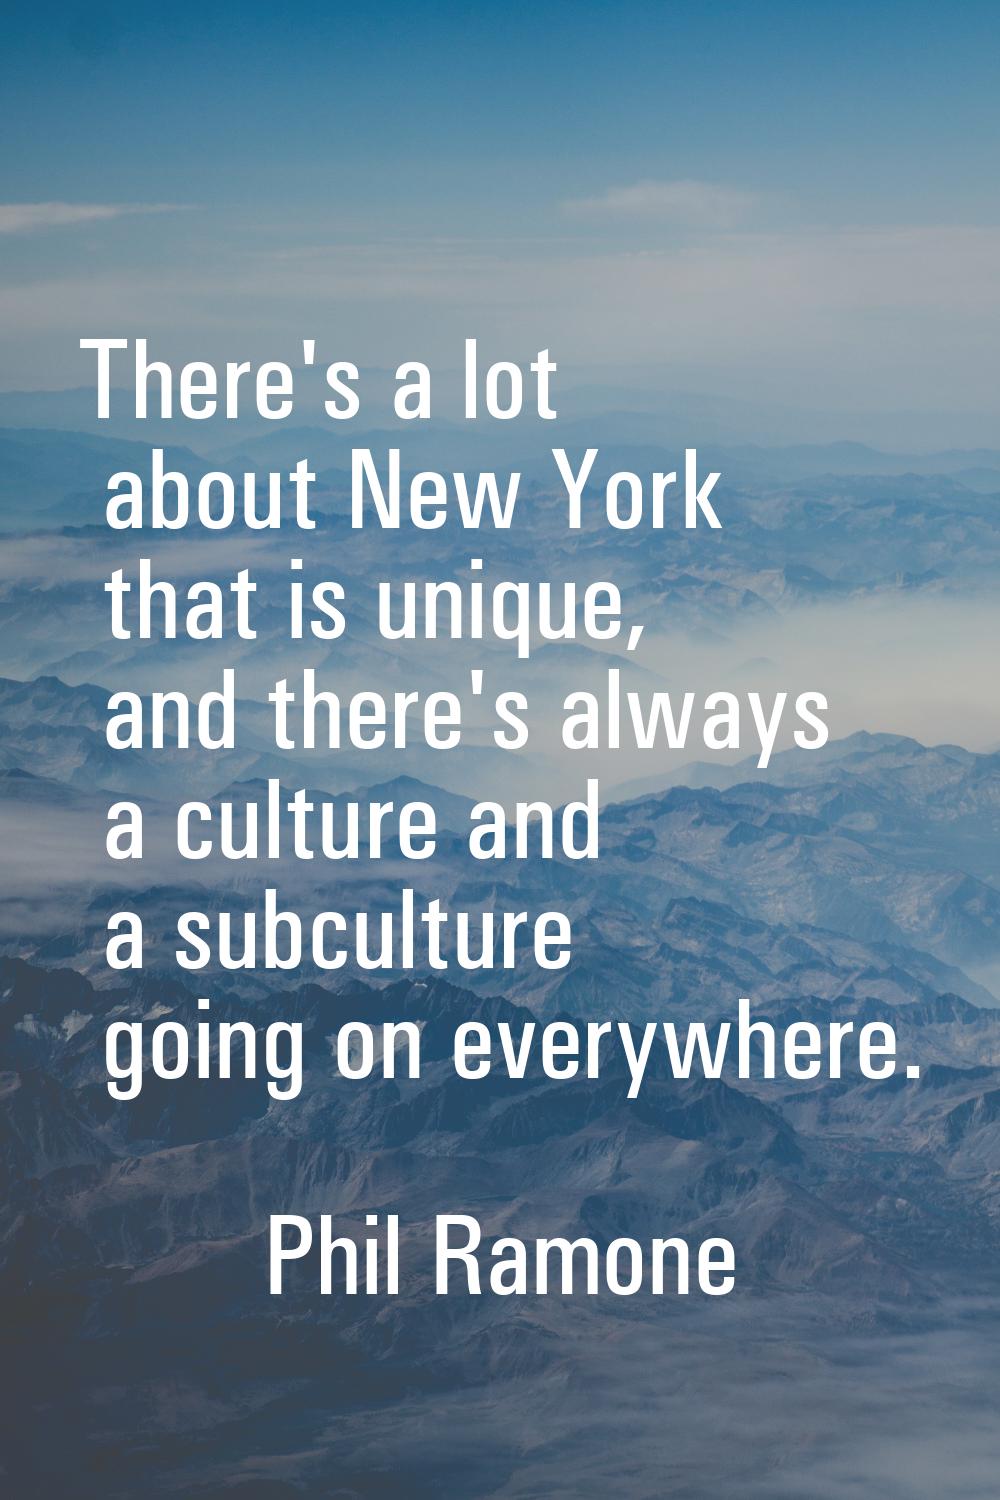 There's a lot about New York that is unique, and there's always a culture and a subculture going on